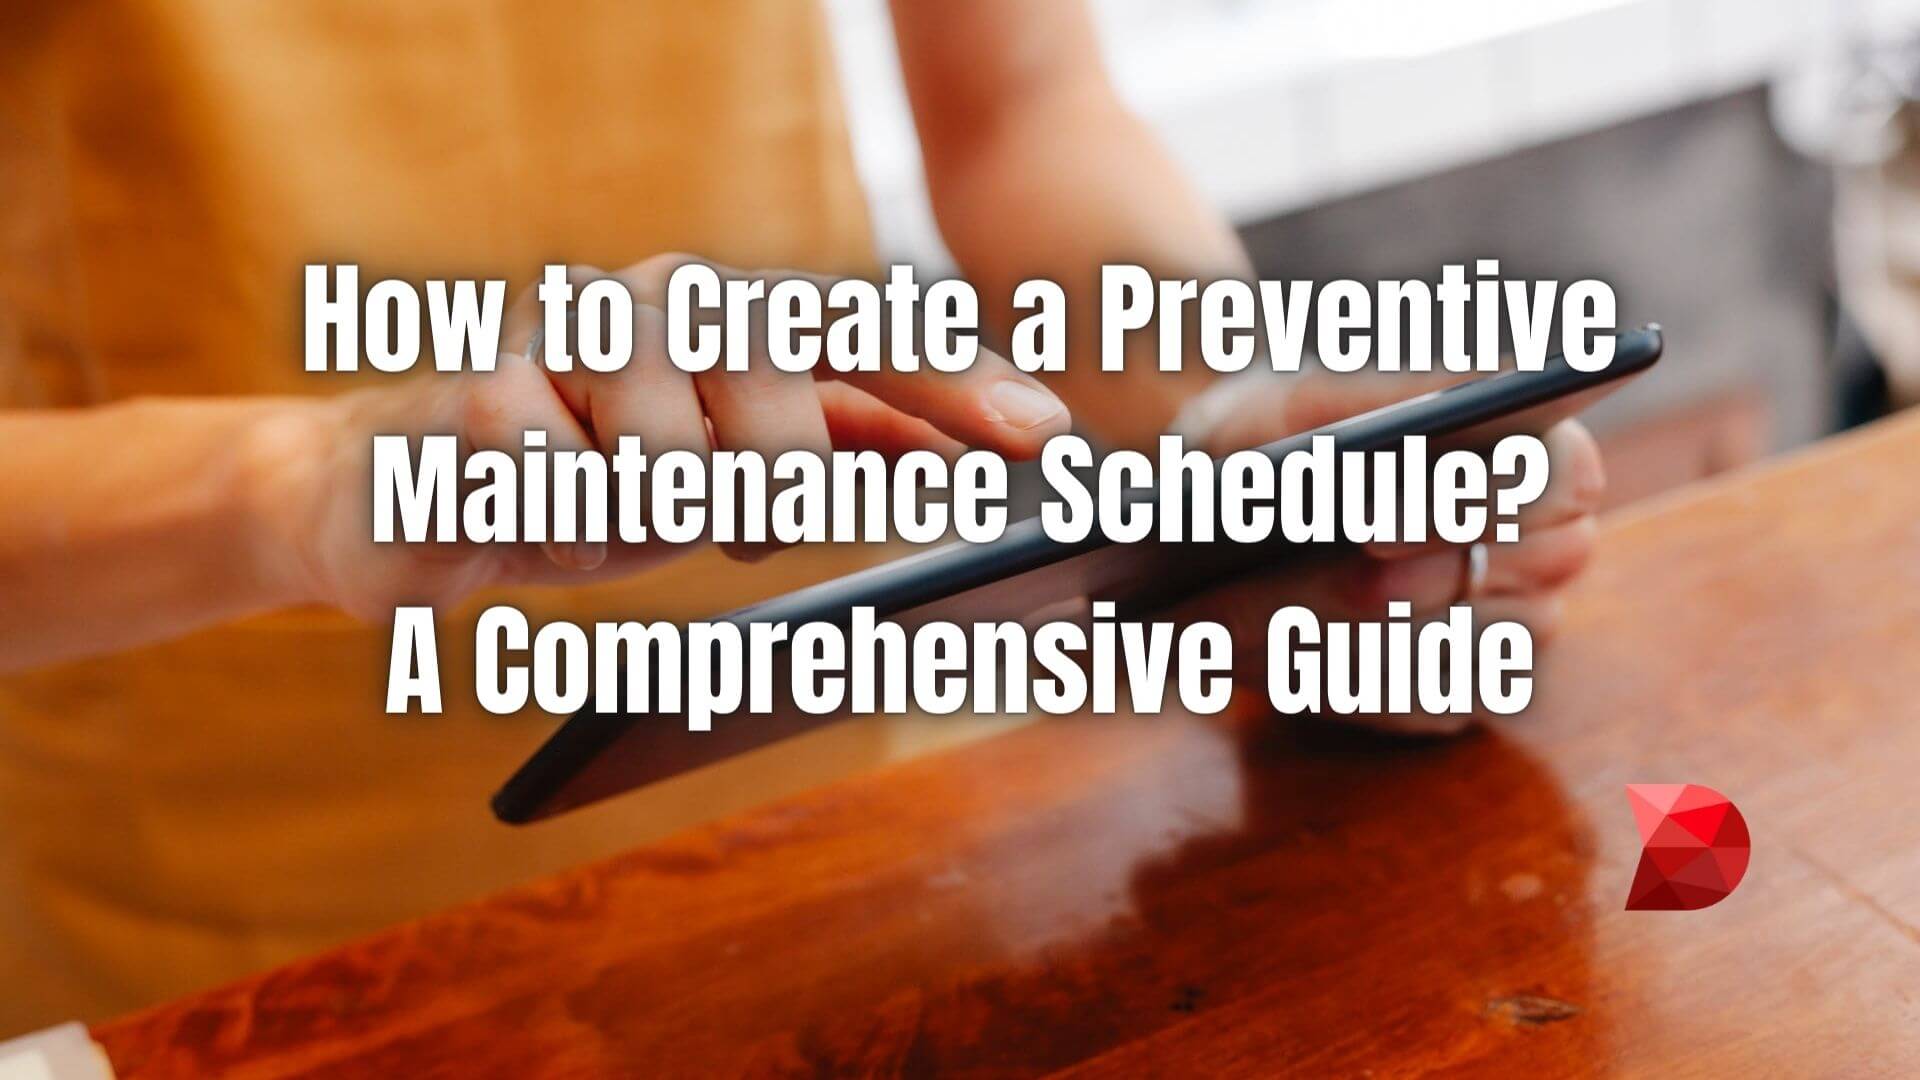 Maximize equipment lifespan and save money! Click here to discover the secrets to creating a powerful preventive maintenance schedule.